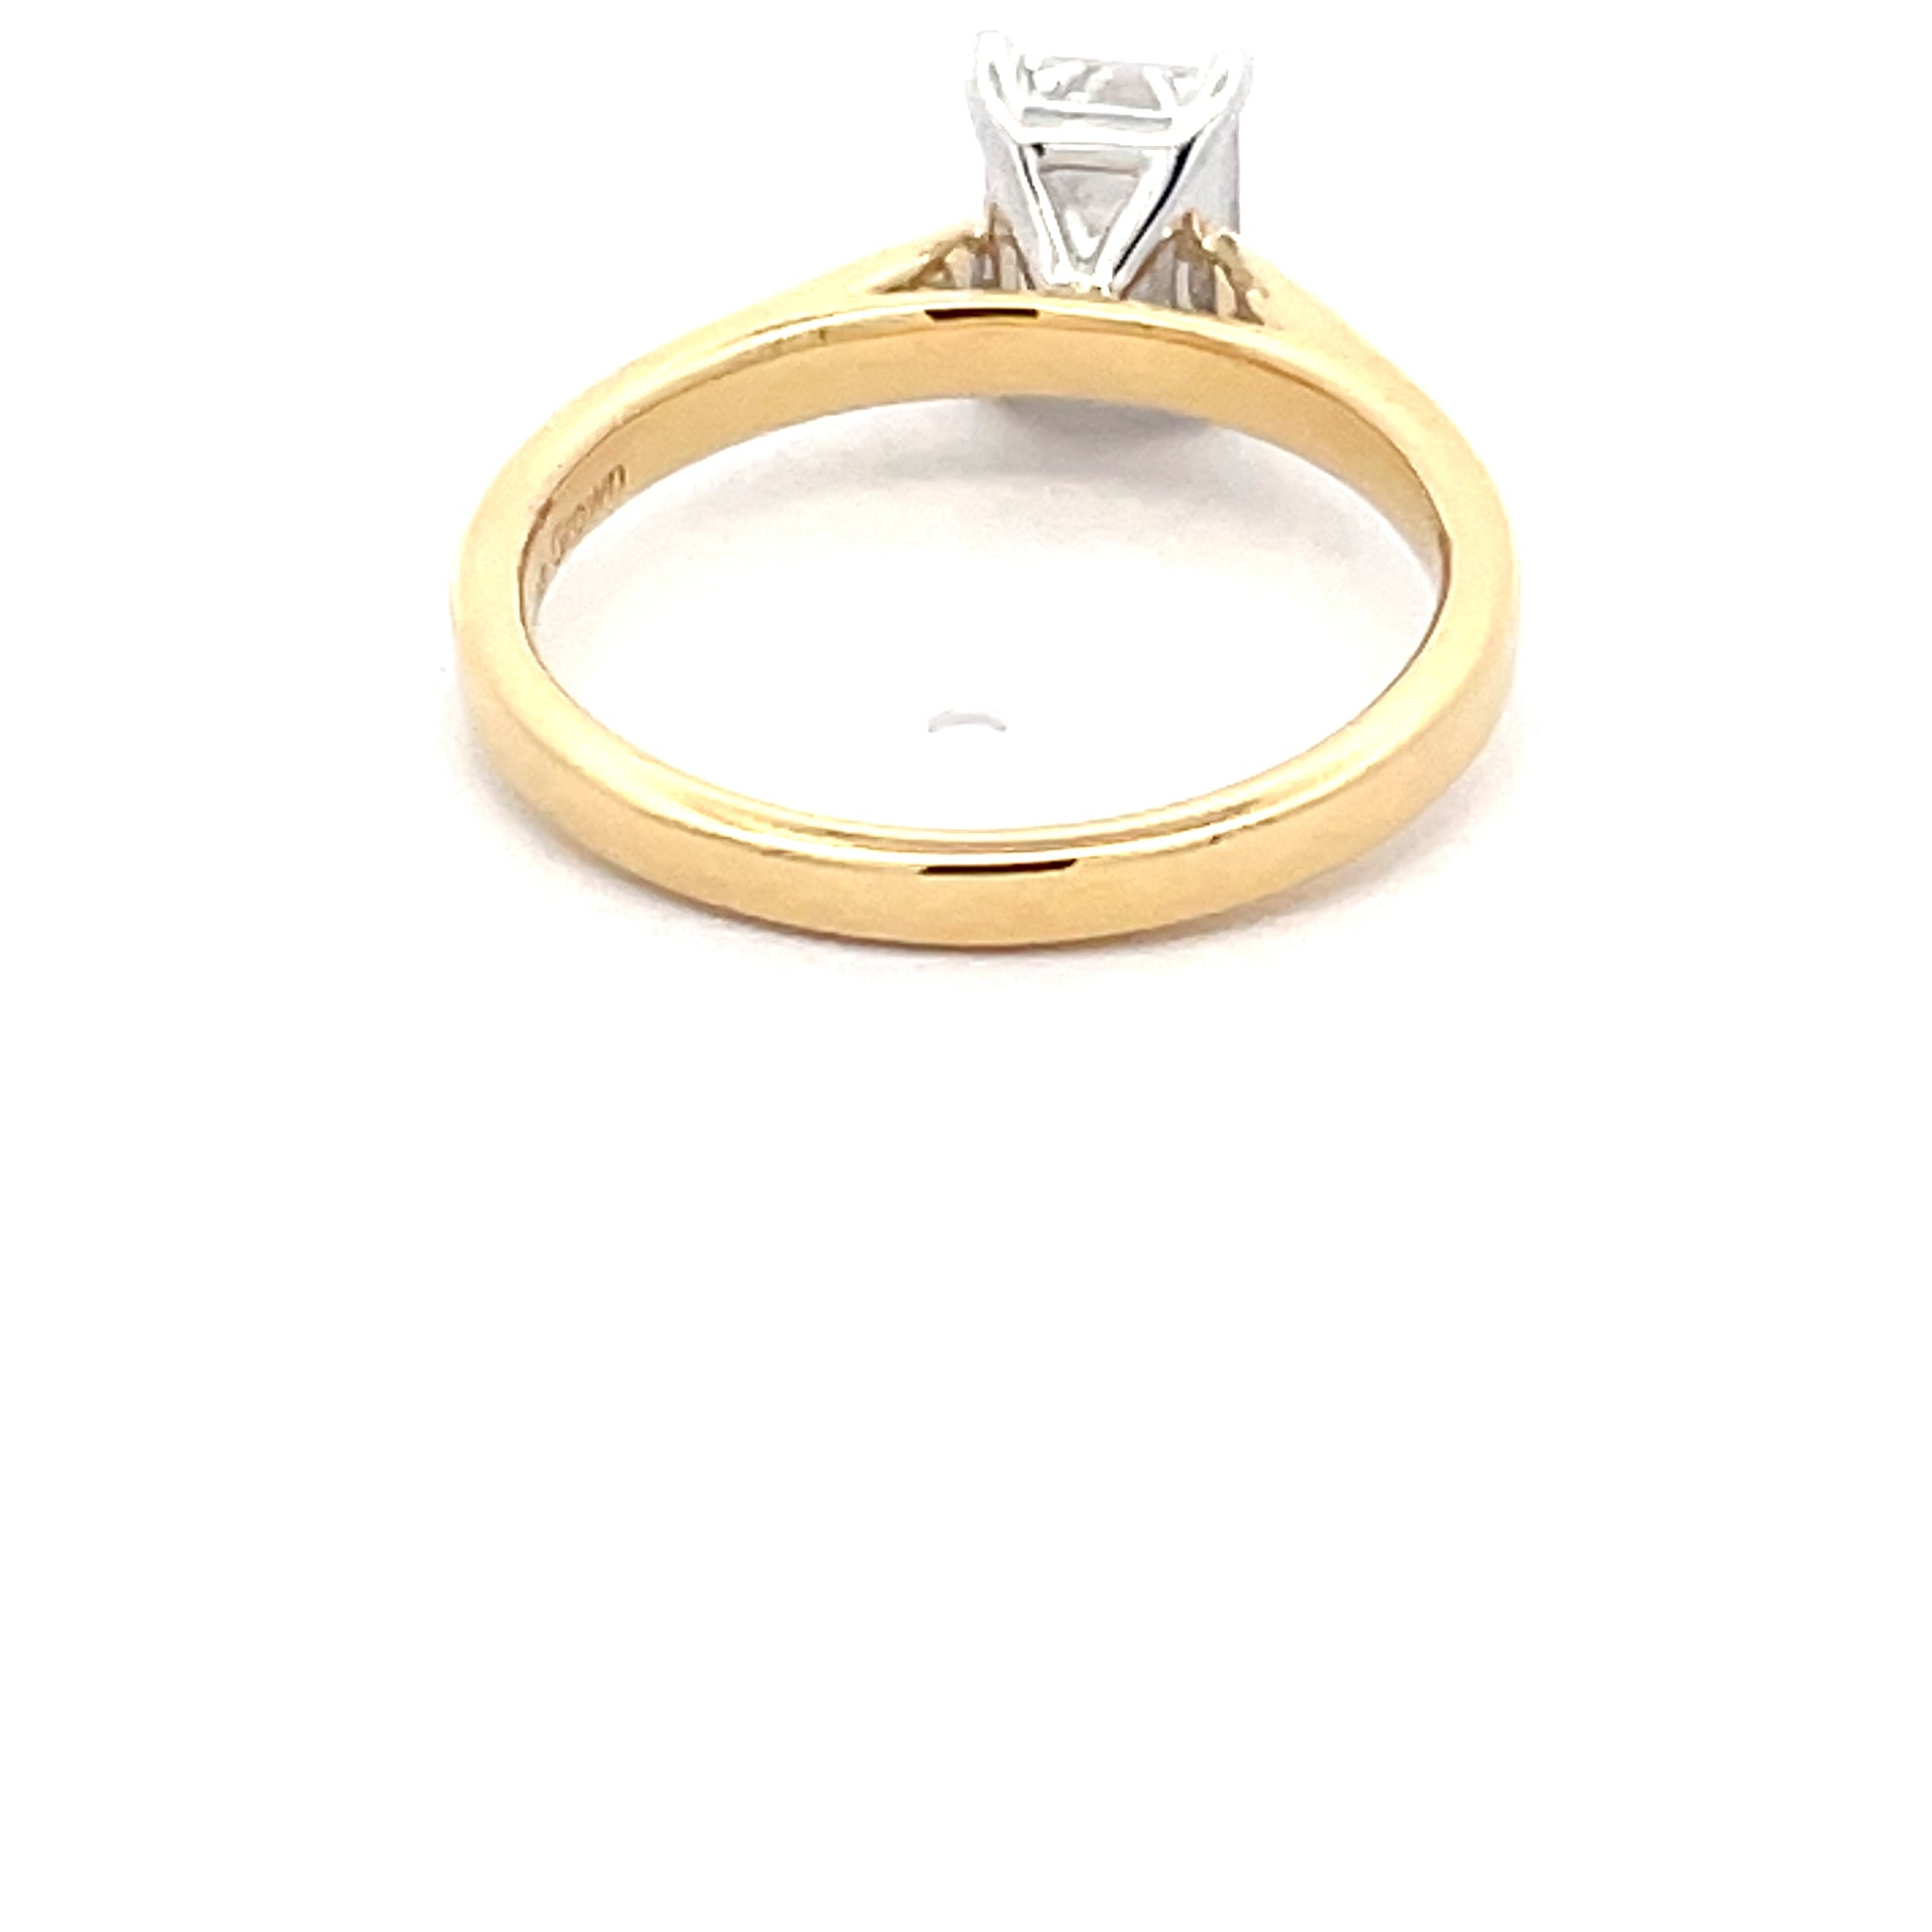 Lab Grown Emerald Cut Diamond Solitaire Ring - 1.20cts  Gardiner Brothers   